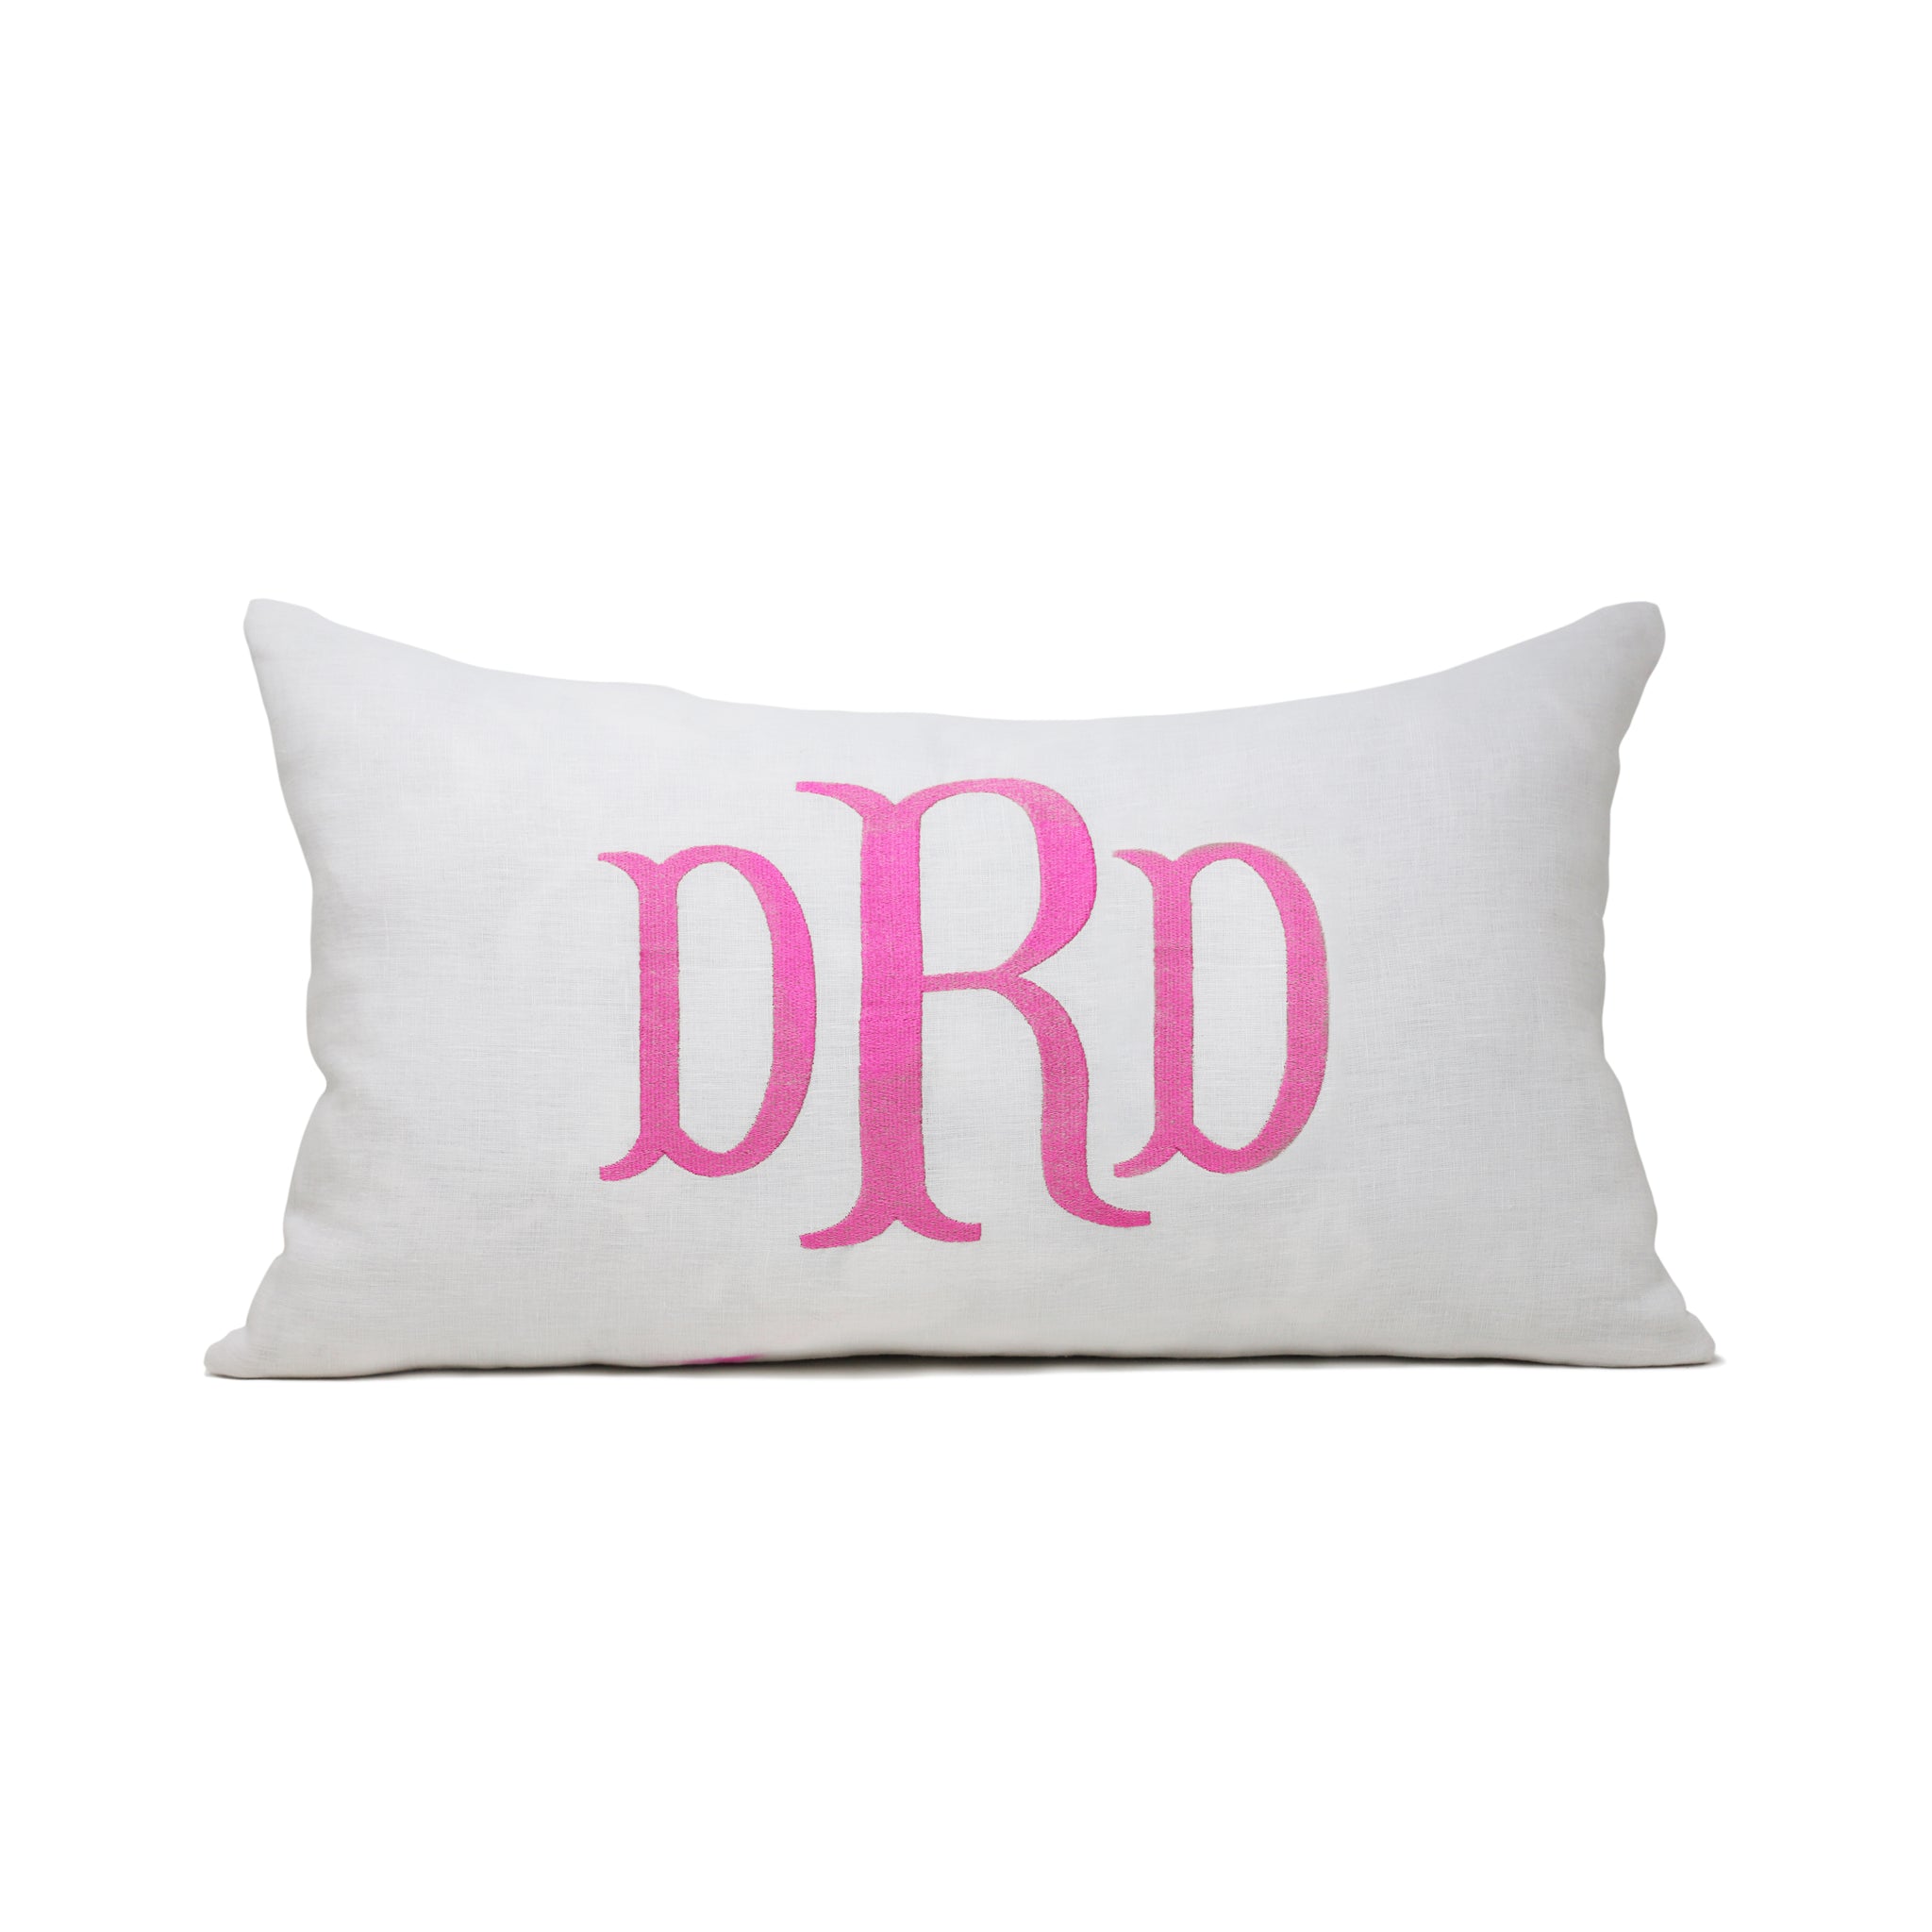 Monogram Pillow Covers. Name Pillowcase. Personalized Initials